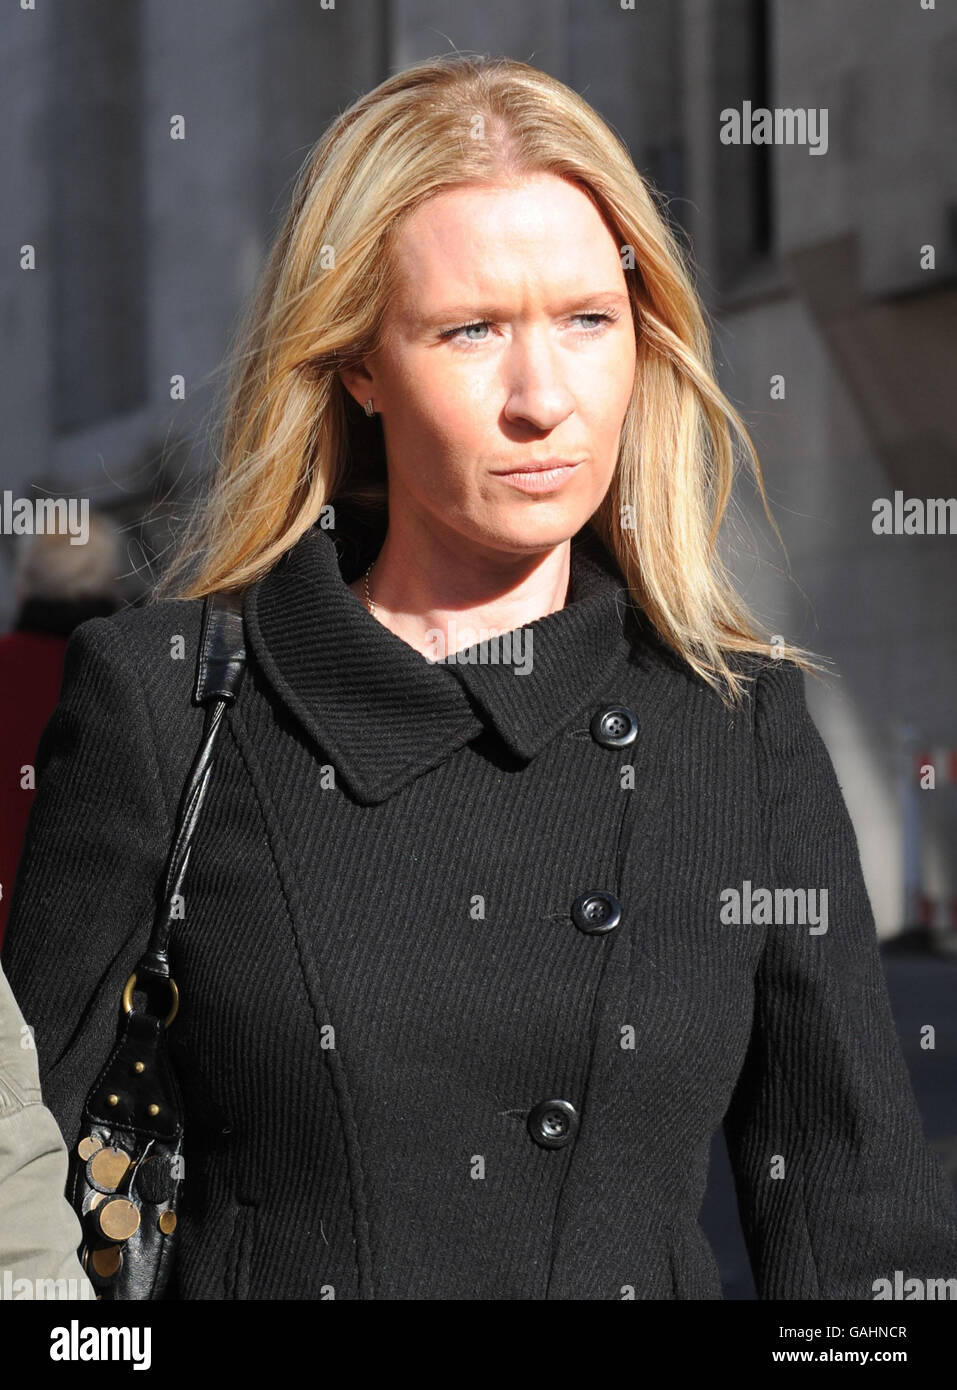 Victoria Chandler, who was celebrating the 35th birthday of Mark Dixie hours before Sally Anne Bowman was murdered in Blenheim Crescent, arrives at the Old Bailey. Chef Dixie reacted angrily when a friend suggested he should be screened by police looking for the killer of Sally Anne, the Old Bailey heard today. Stock Photo